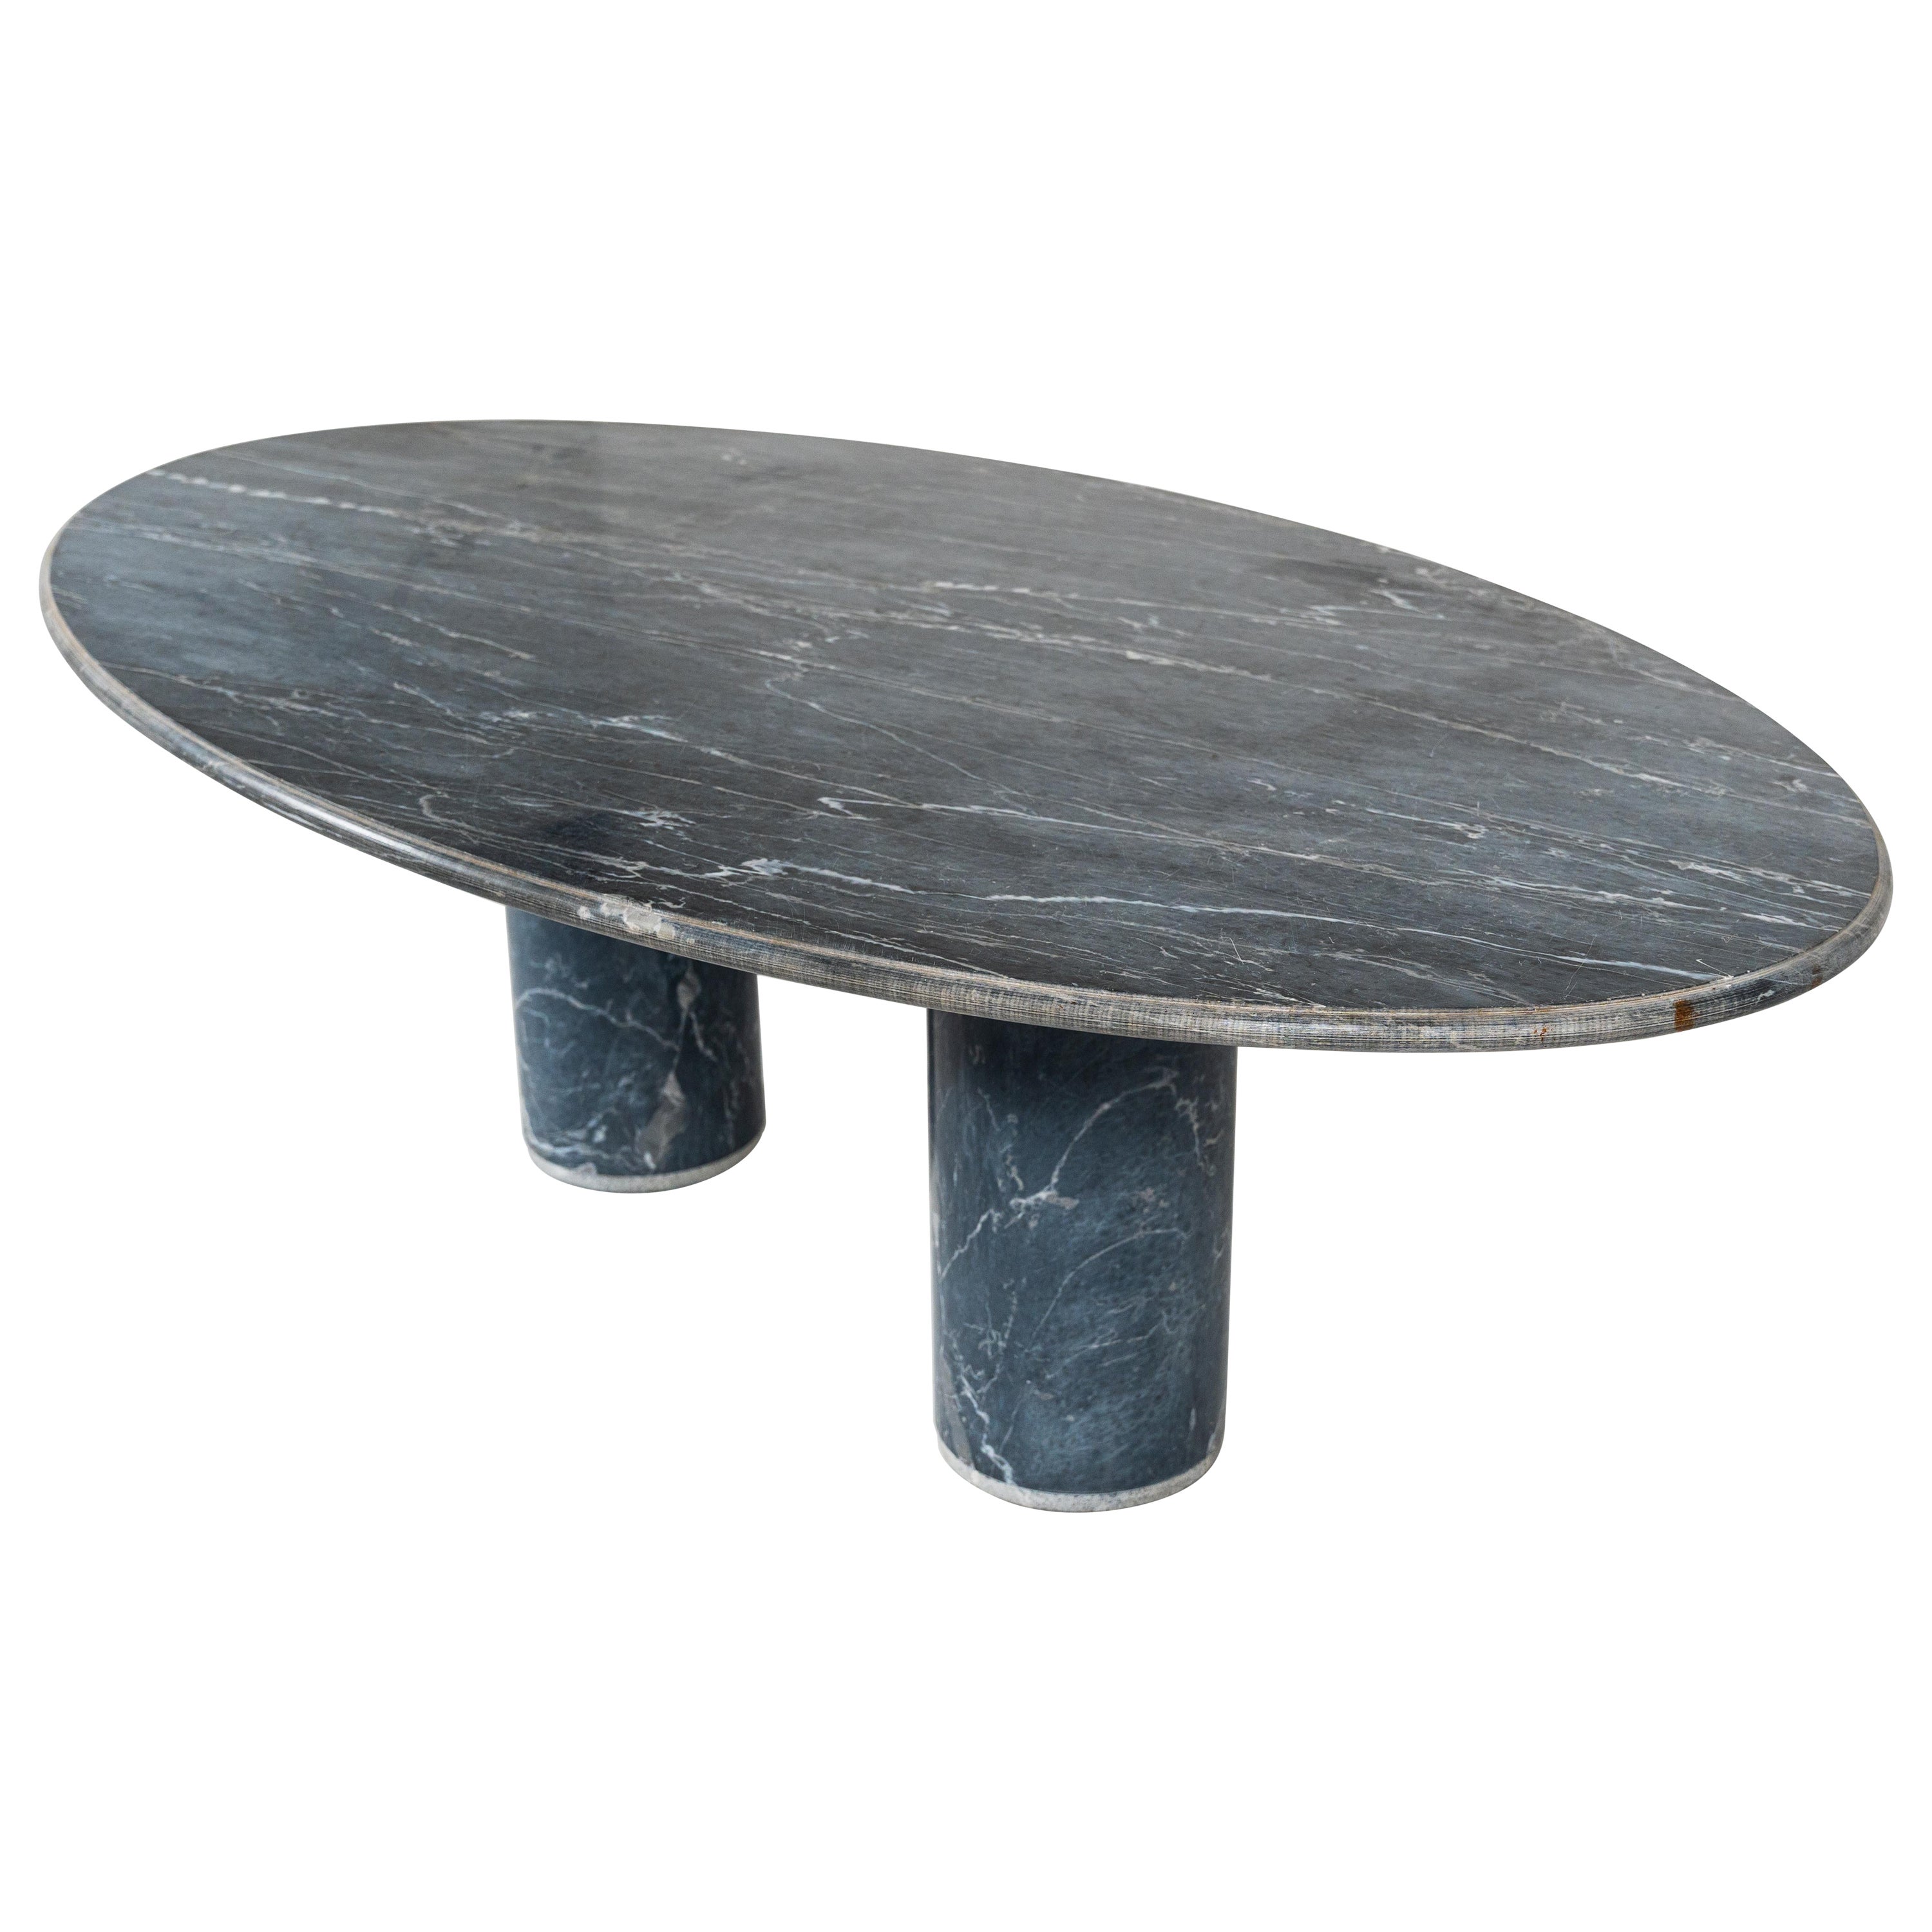 Ovale del Giardiniere Table by Achille Castiglioni for Upgroup, Marble, 1980s For Sale